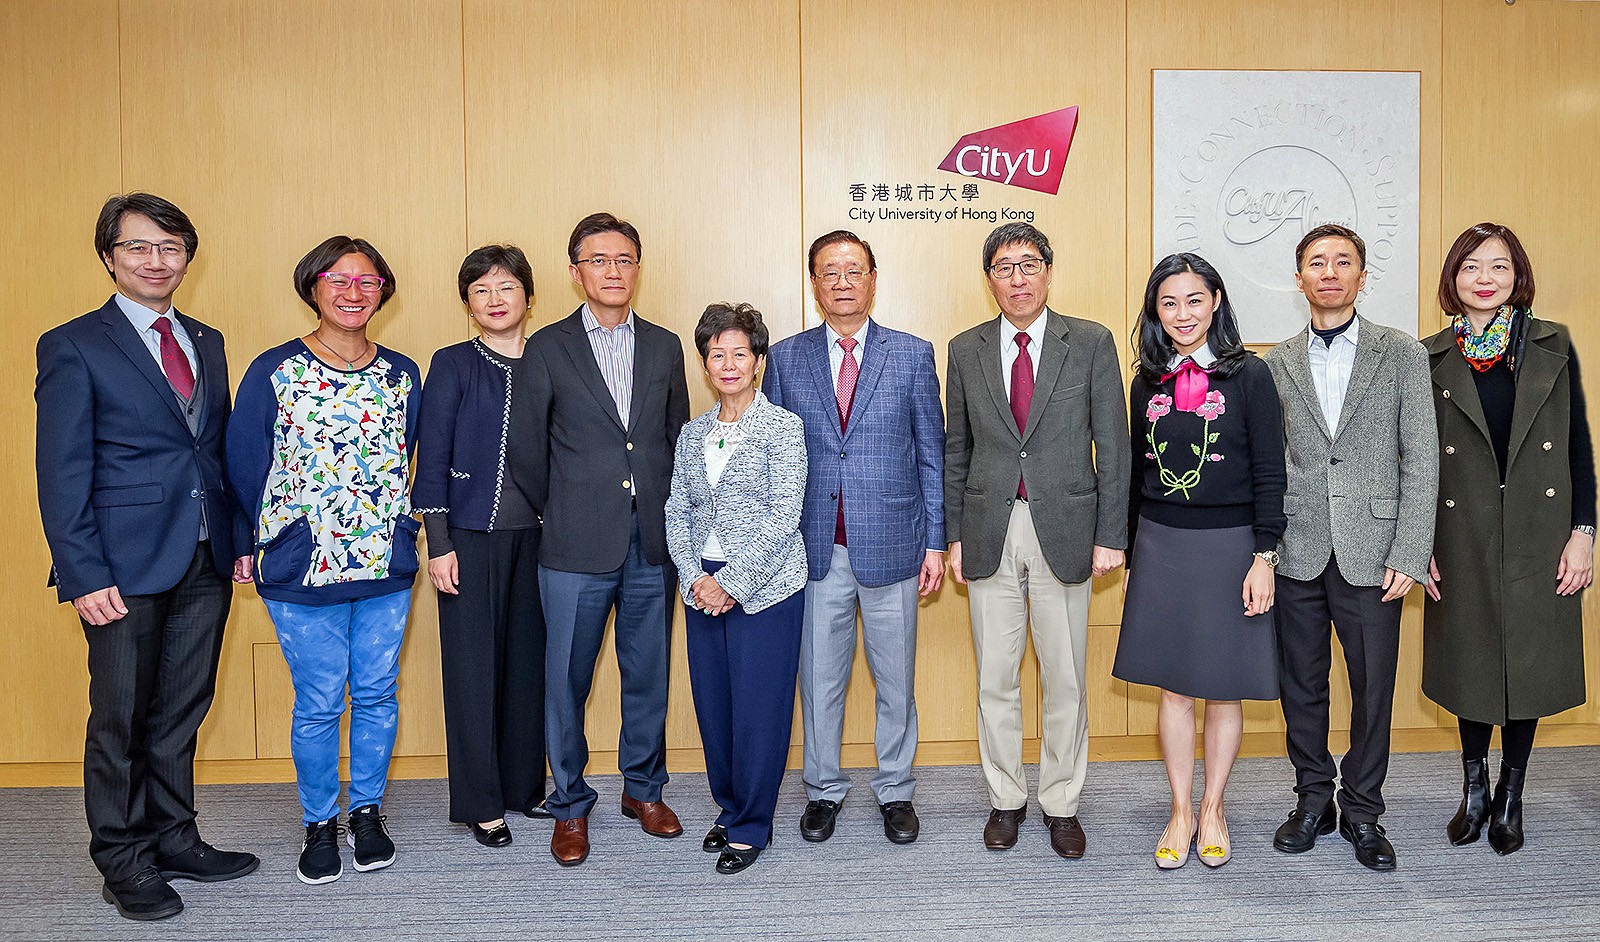 Mr and Mrs Chu, their family members and CityU senior management at the cheque presentation ceremony.